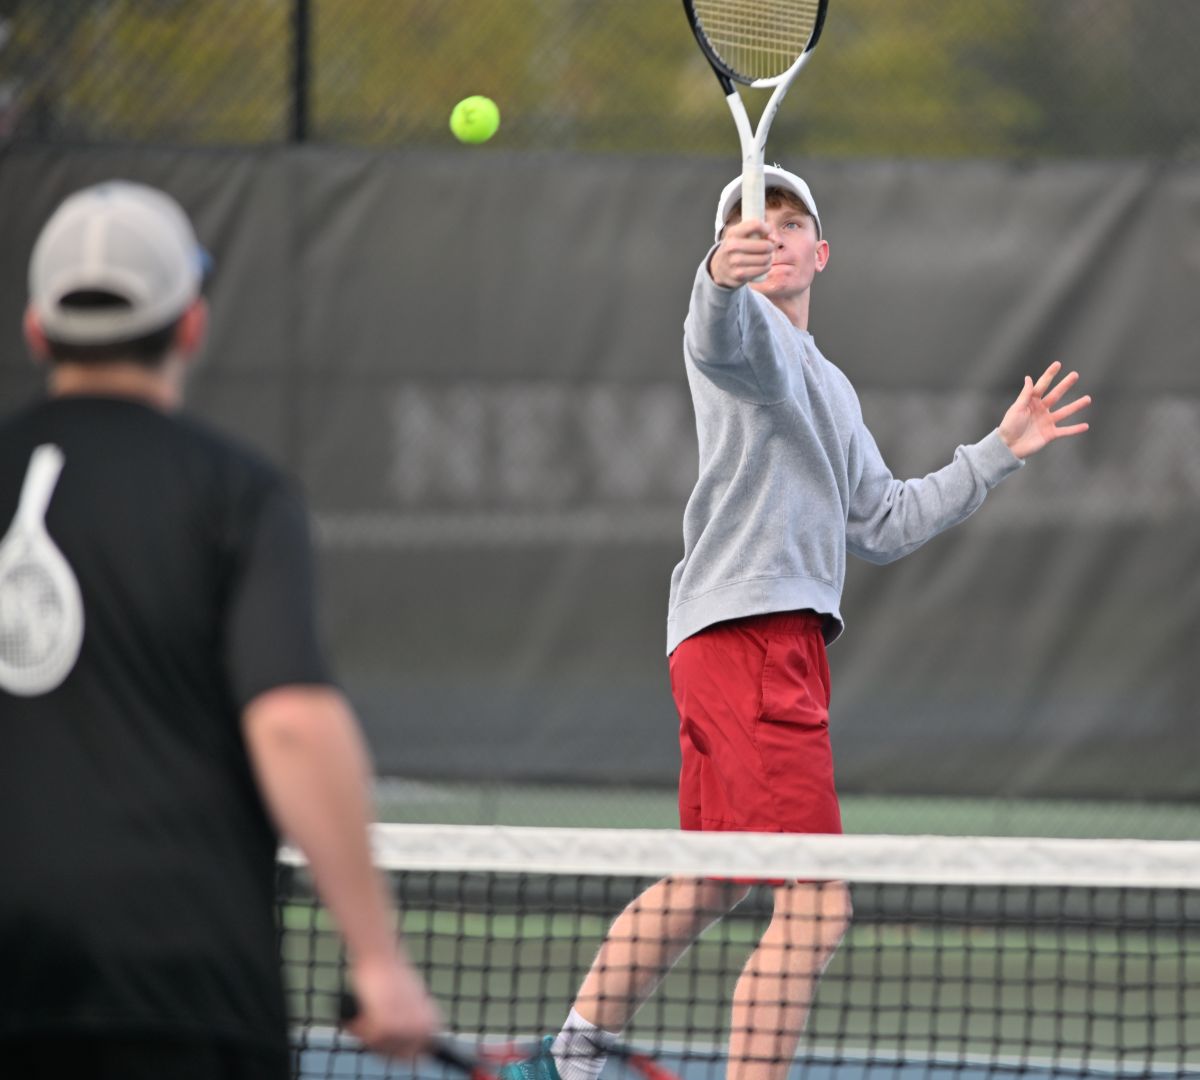 dover-at-np-tennis-4-4-24-25.jpg